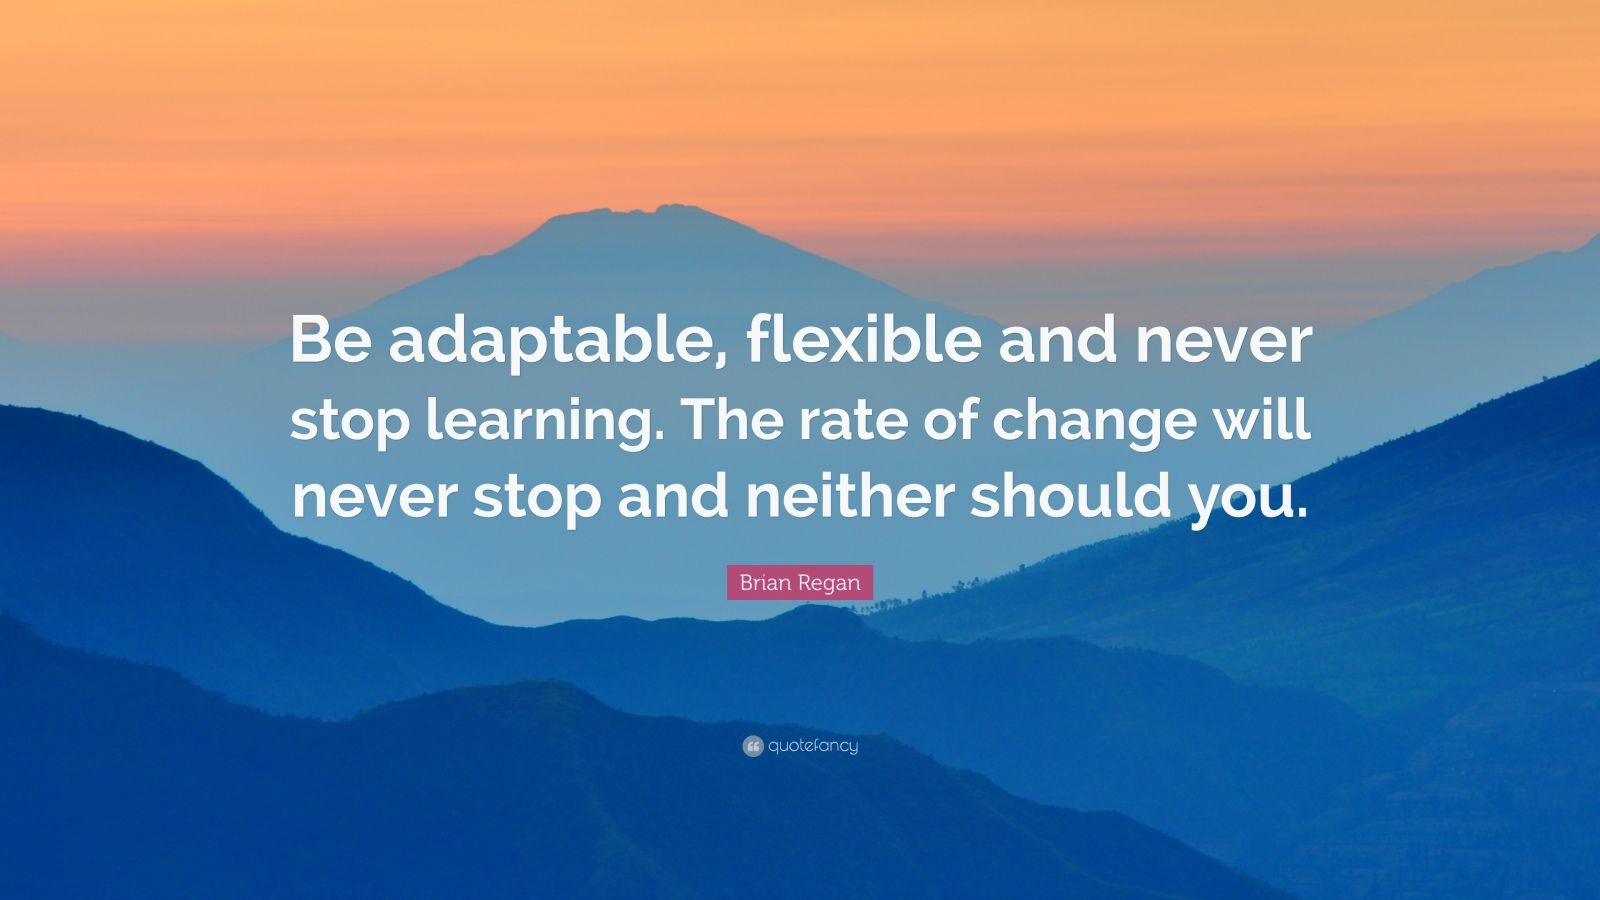 Brian Regan Quote: “Be adaptable, flexible and never stop learning. The